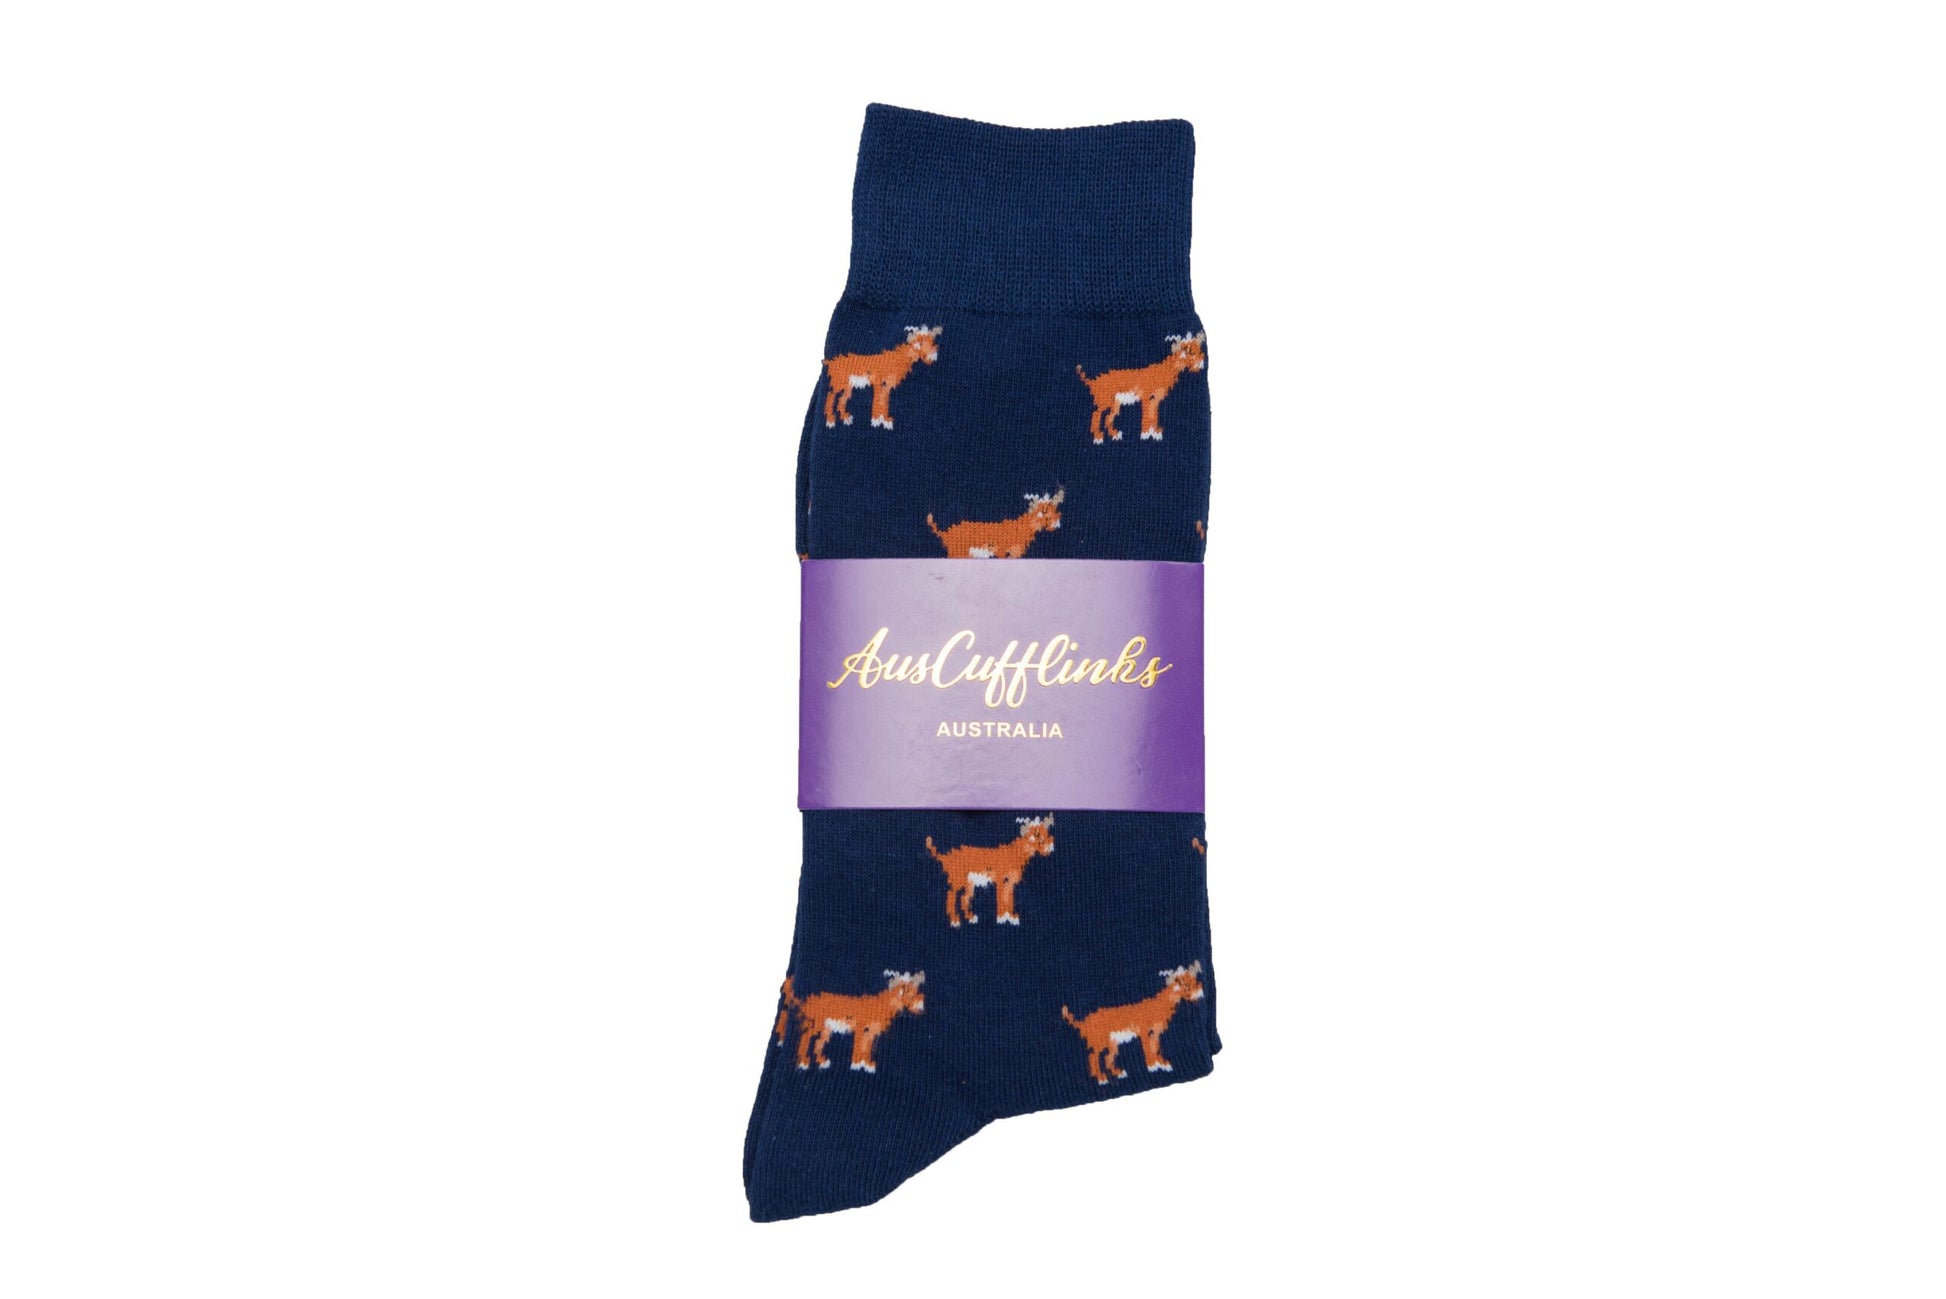 A pair of Goat Socks with goats on them.